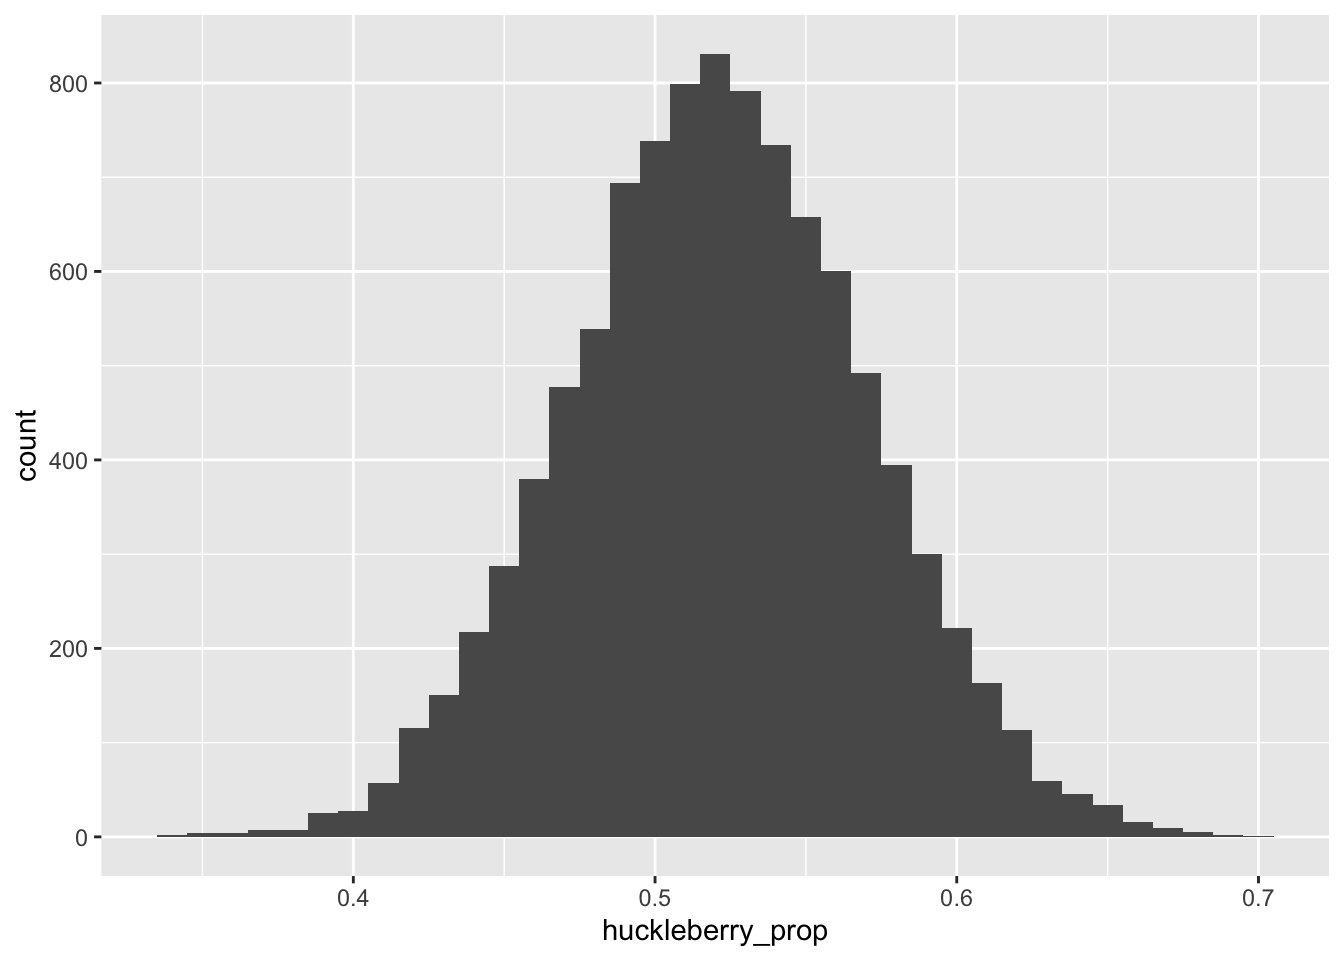 The sampling distribution for the proportion of H's (huckleberry pie) in our hypothetical dessert survey.